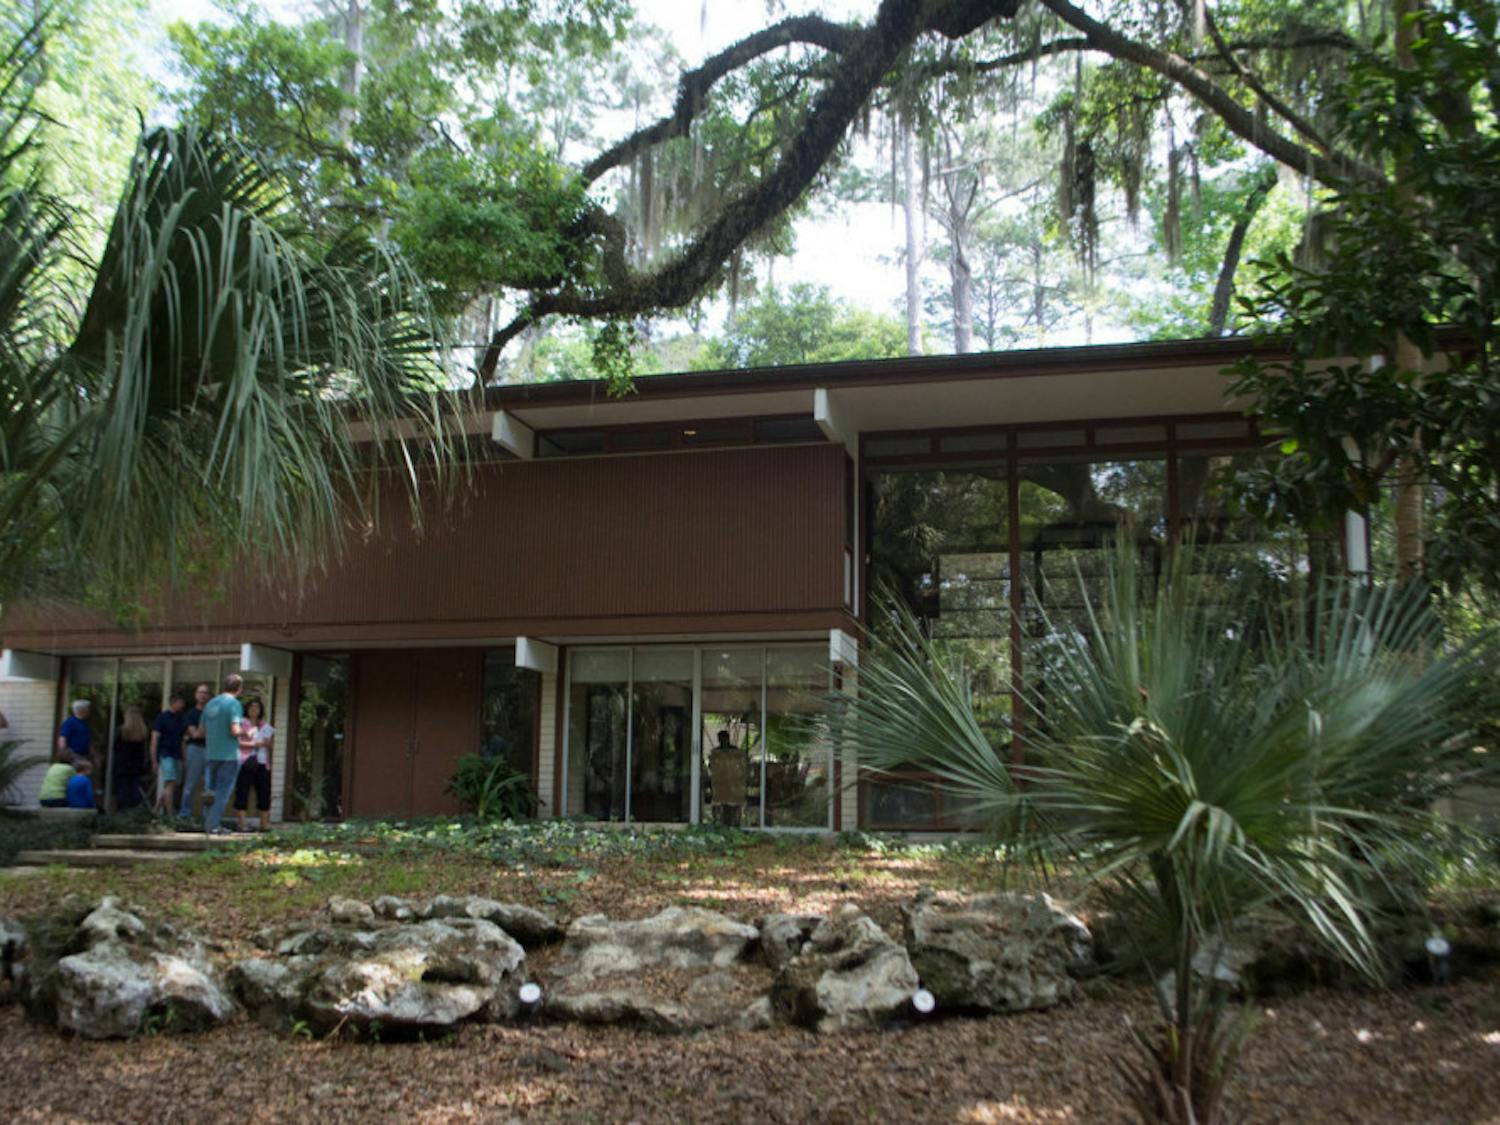 The 3105 SW 5th Court house was one of the six mid-century modern homes featured on the Gainesville Modern Weekend tour&nbsp;on Saturday. Each house had contractors and/or the homeowners on-site to answer questions.&nbsp;